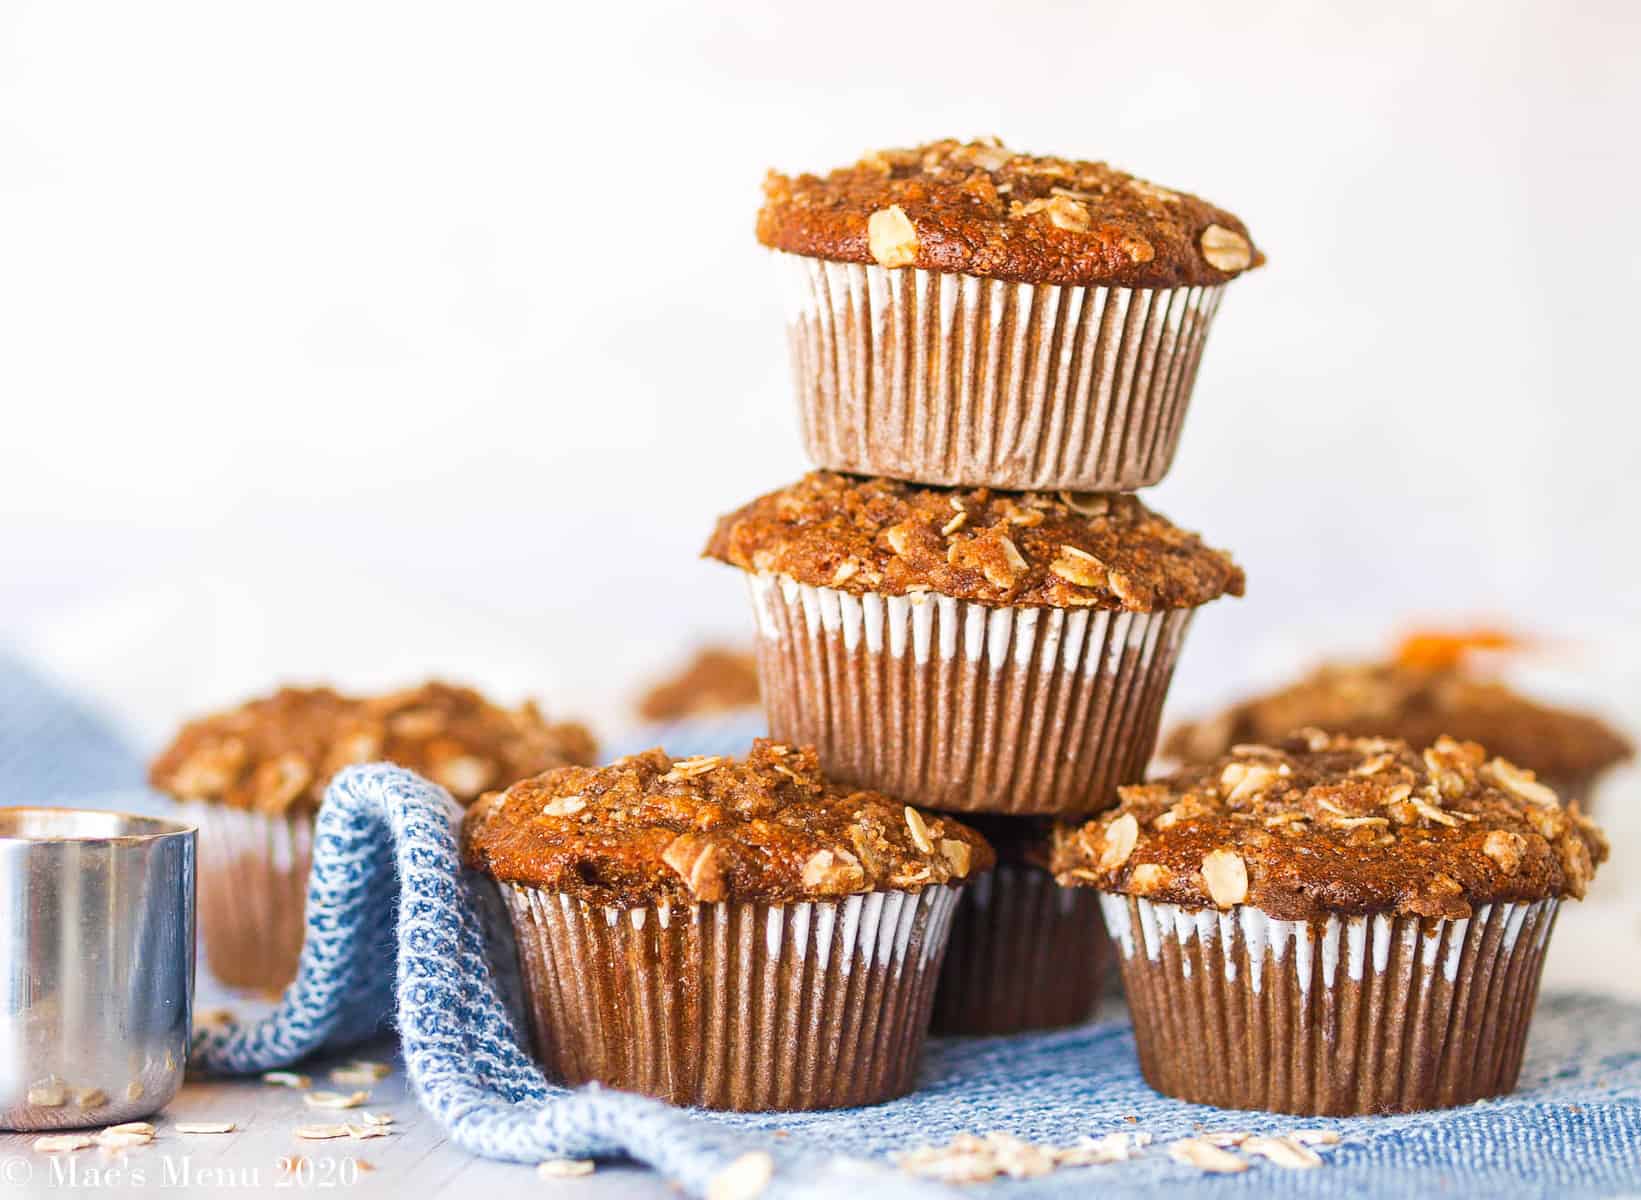 A stack of gluten-free pumpkin muffins on a blue and white towel